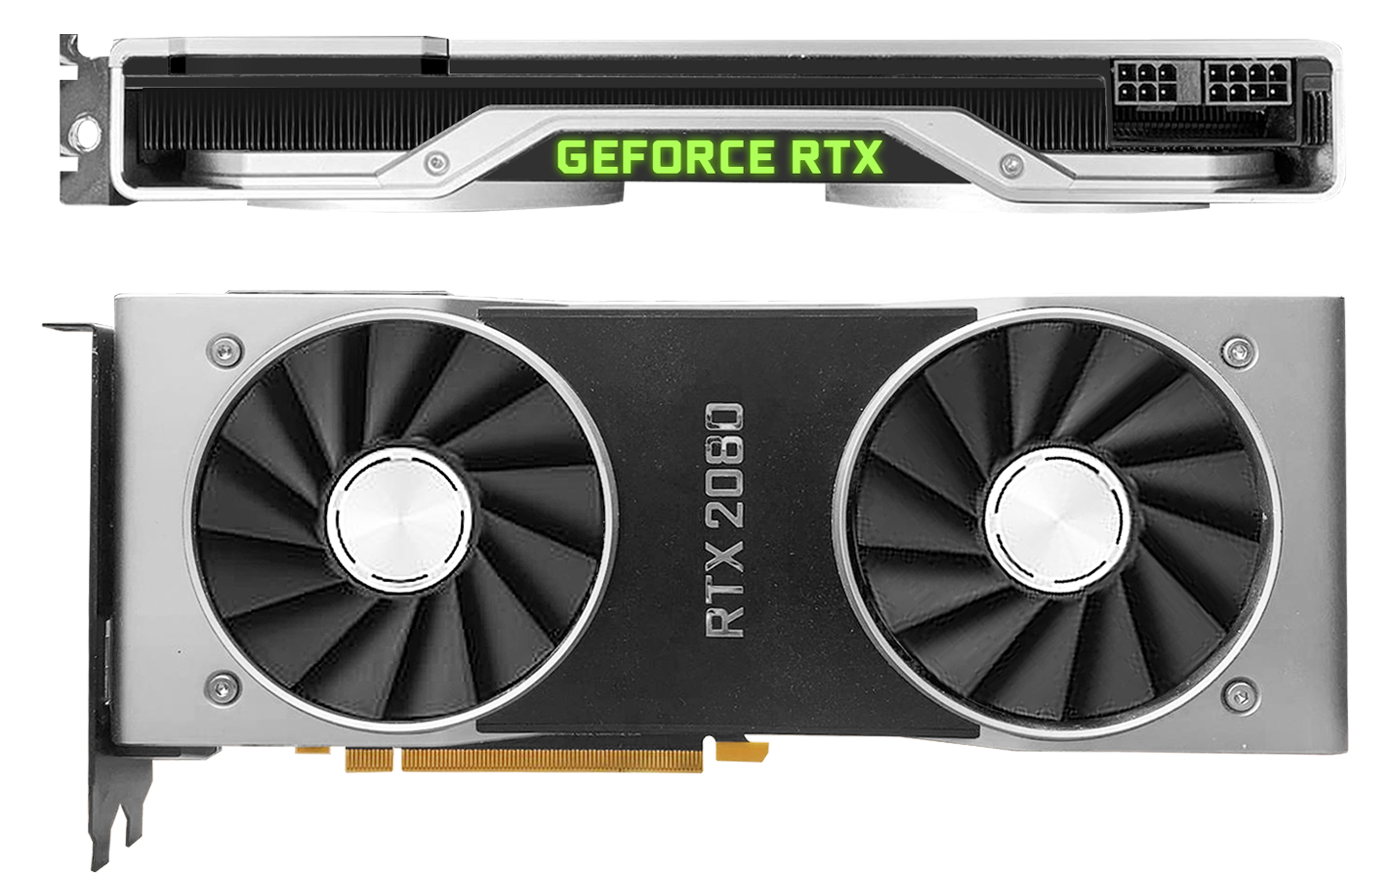 Illustration of a Nvidia GEFORCE RTX 2080 graphics card with a modern GPU (illustration by MarcusBurns1977 under CC BY 3.0 license).